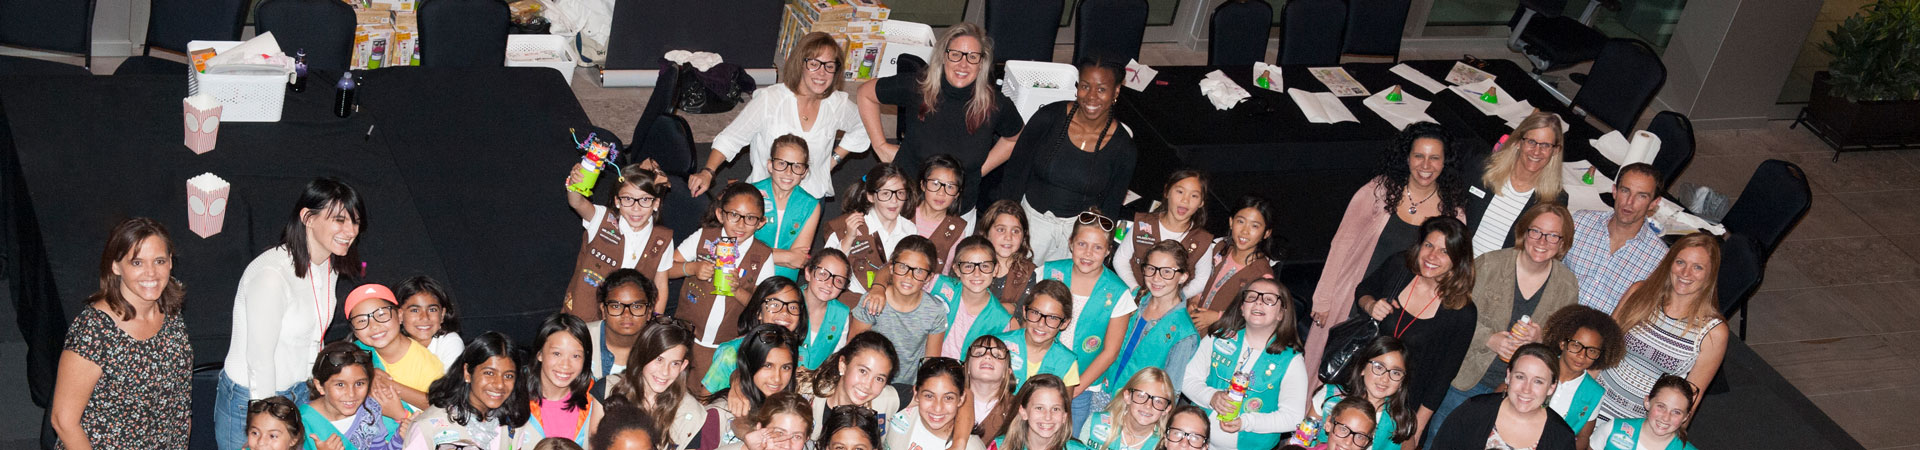  A group of adult Girl Scout volunteers and youth Girl Scout members are gathered for a service unit meeting. Many are wearing green or brown vests embellished in a variety of pins and badges.  